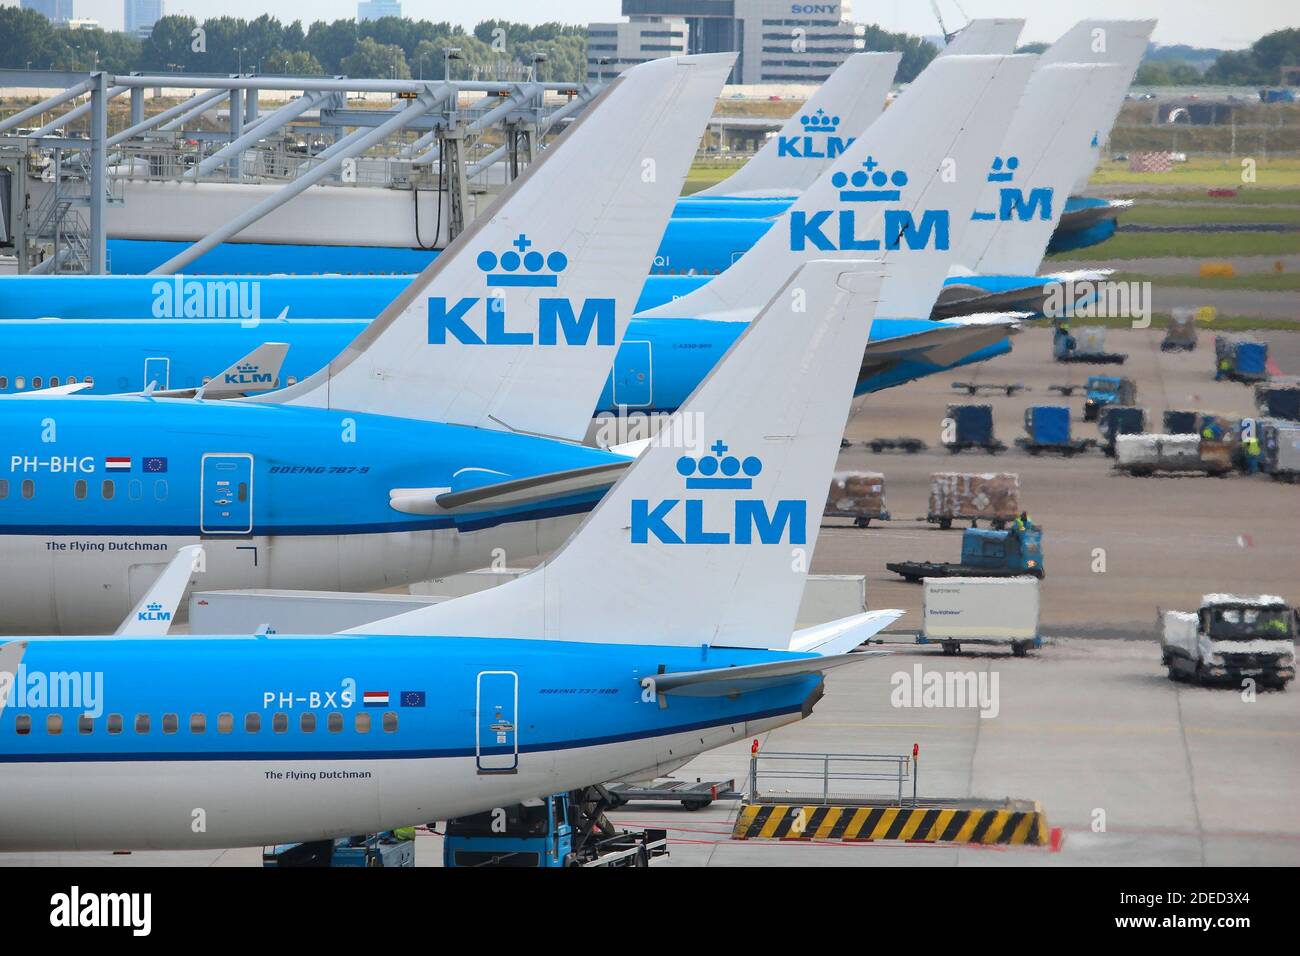 AMSTERDAM, NETHERLANDS - JULY 11, 2017: KLM Airlines fleet at Schiphol Airport in Amsterdam. Schiphol is the 12th busiest airport in the world with mo Stock Photo